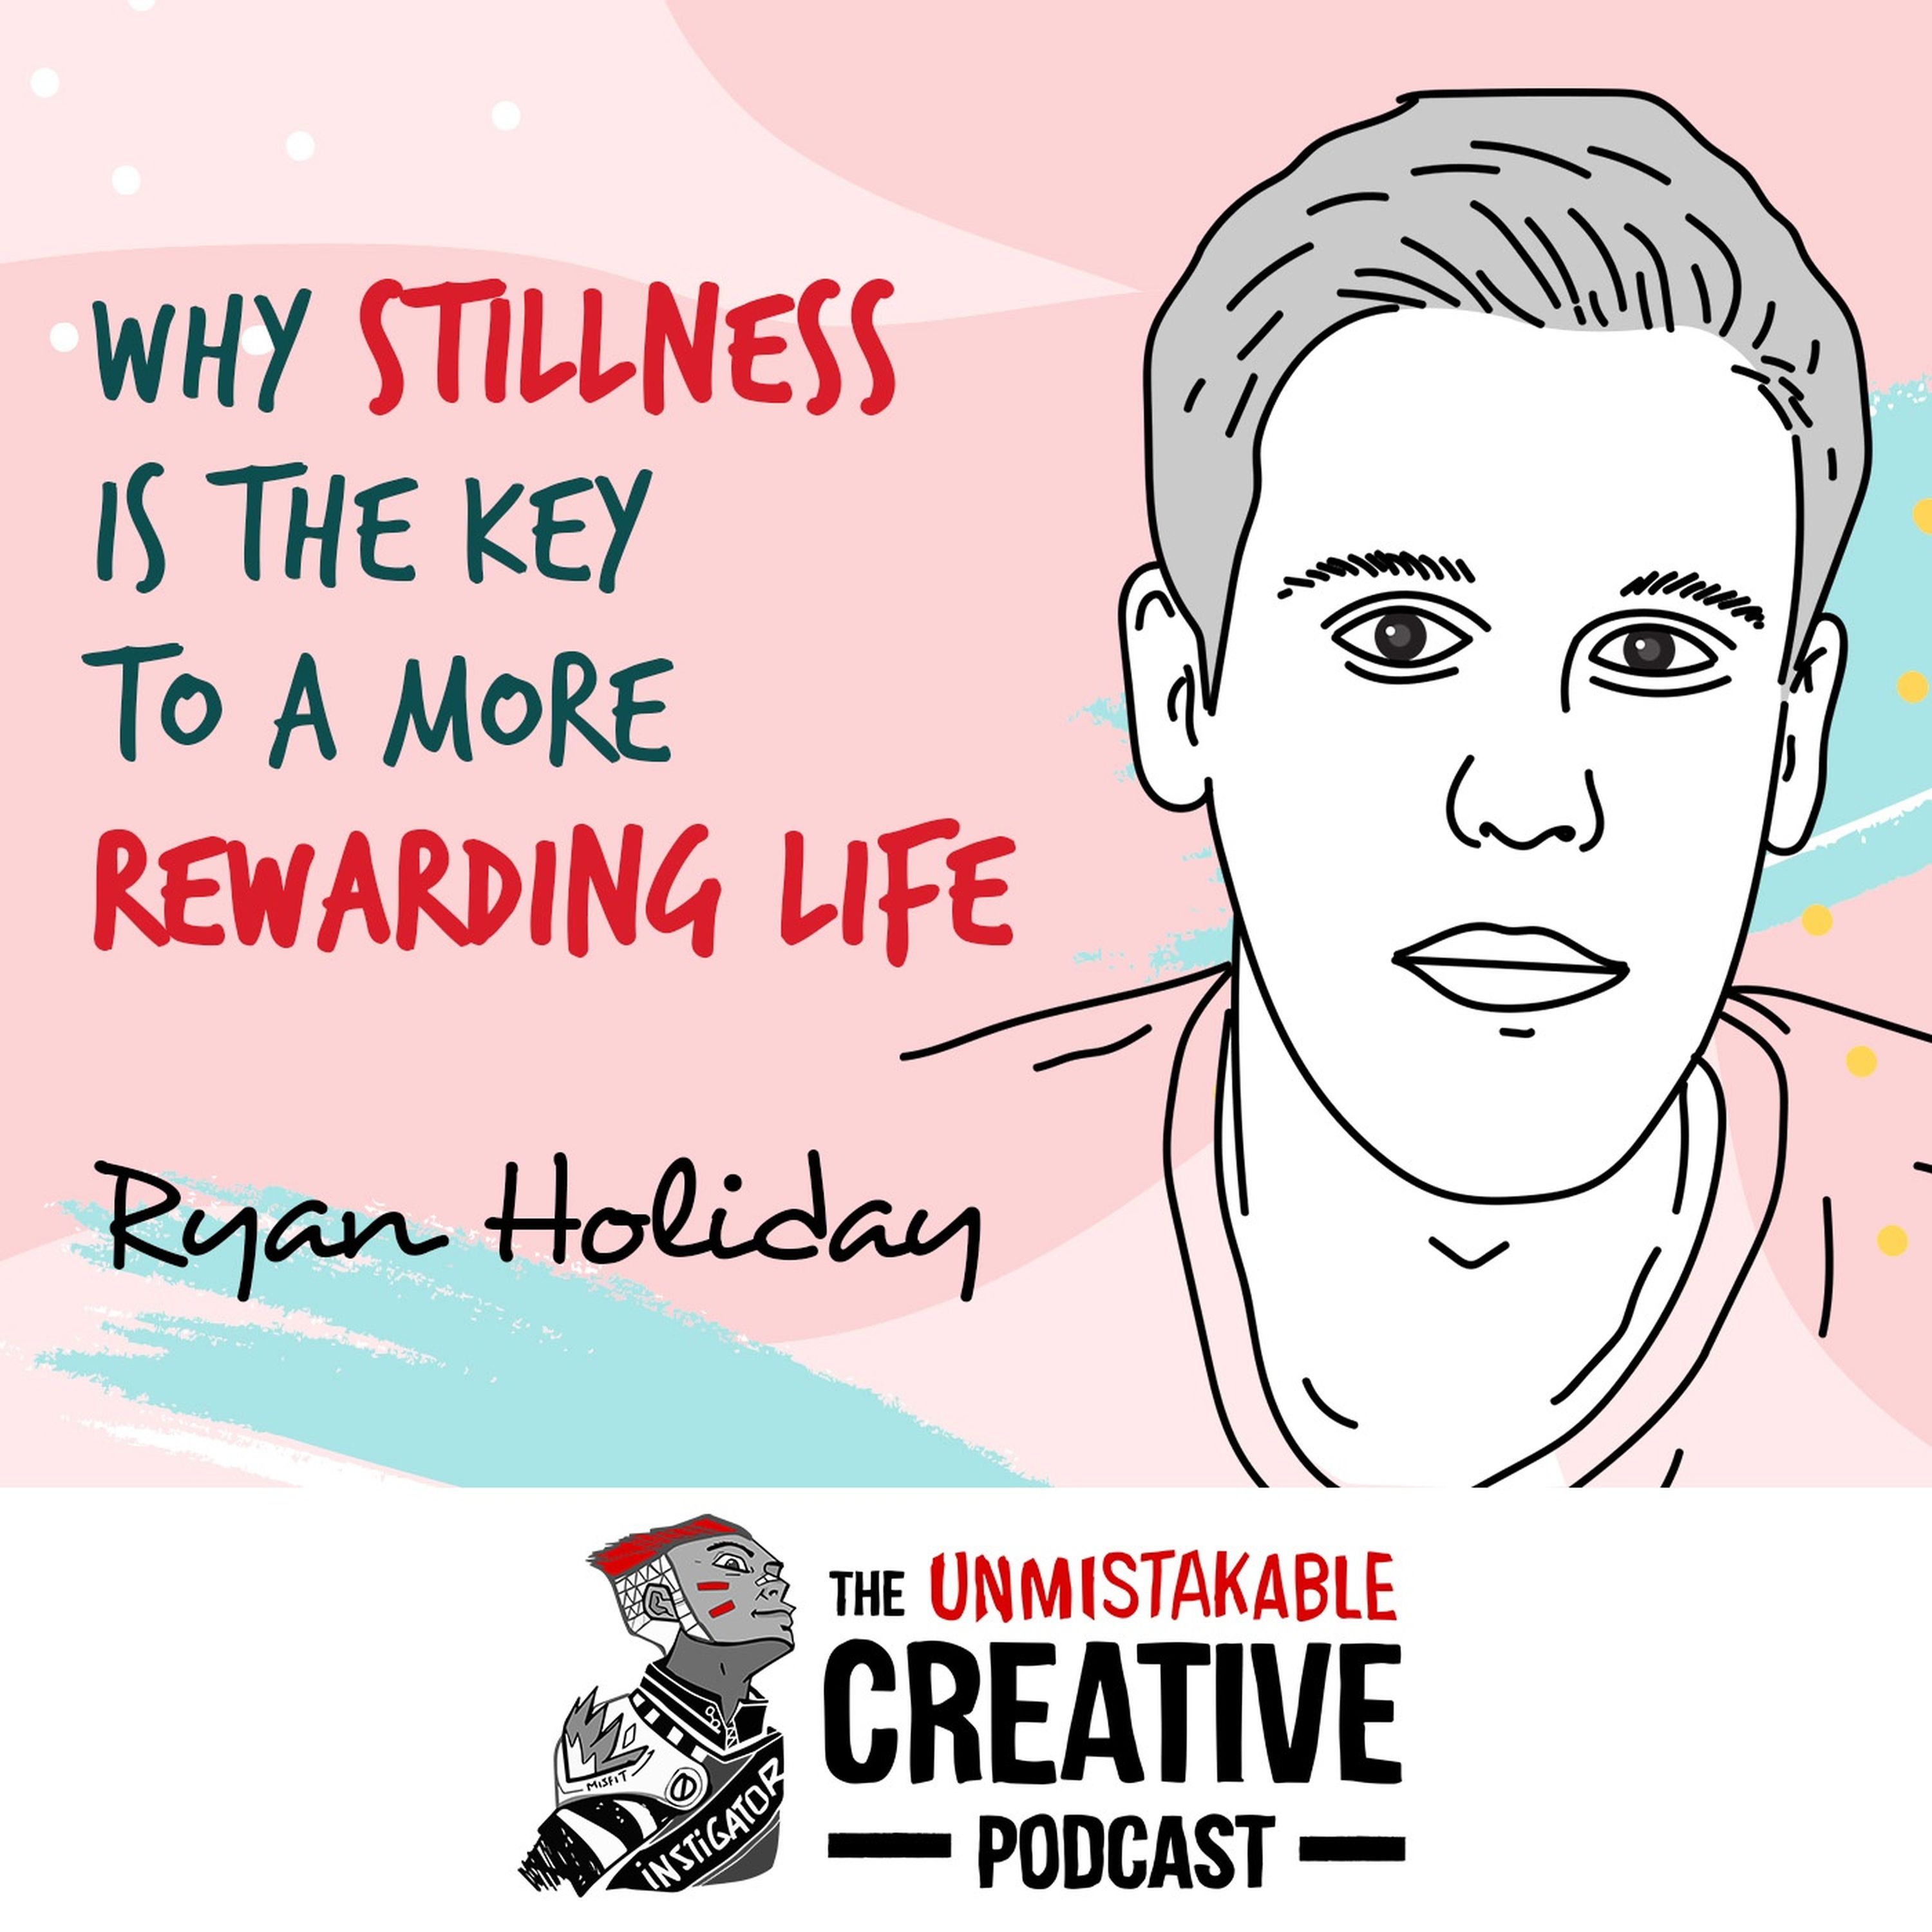 Ryan Holiday: Why Stillness is the Key to a More Rewarding Life